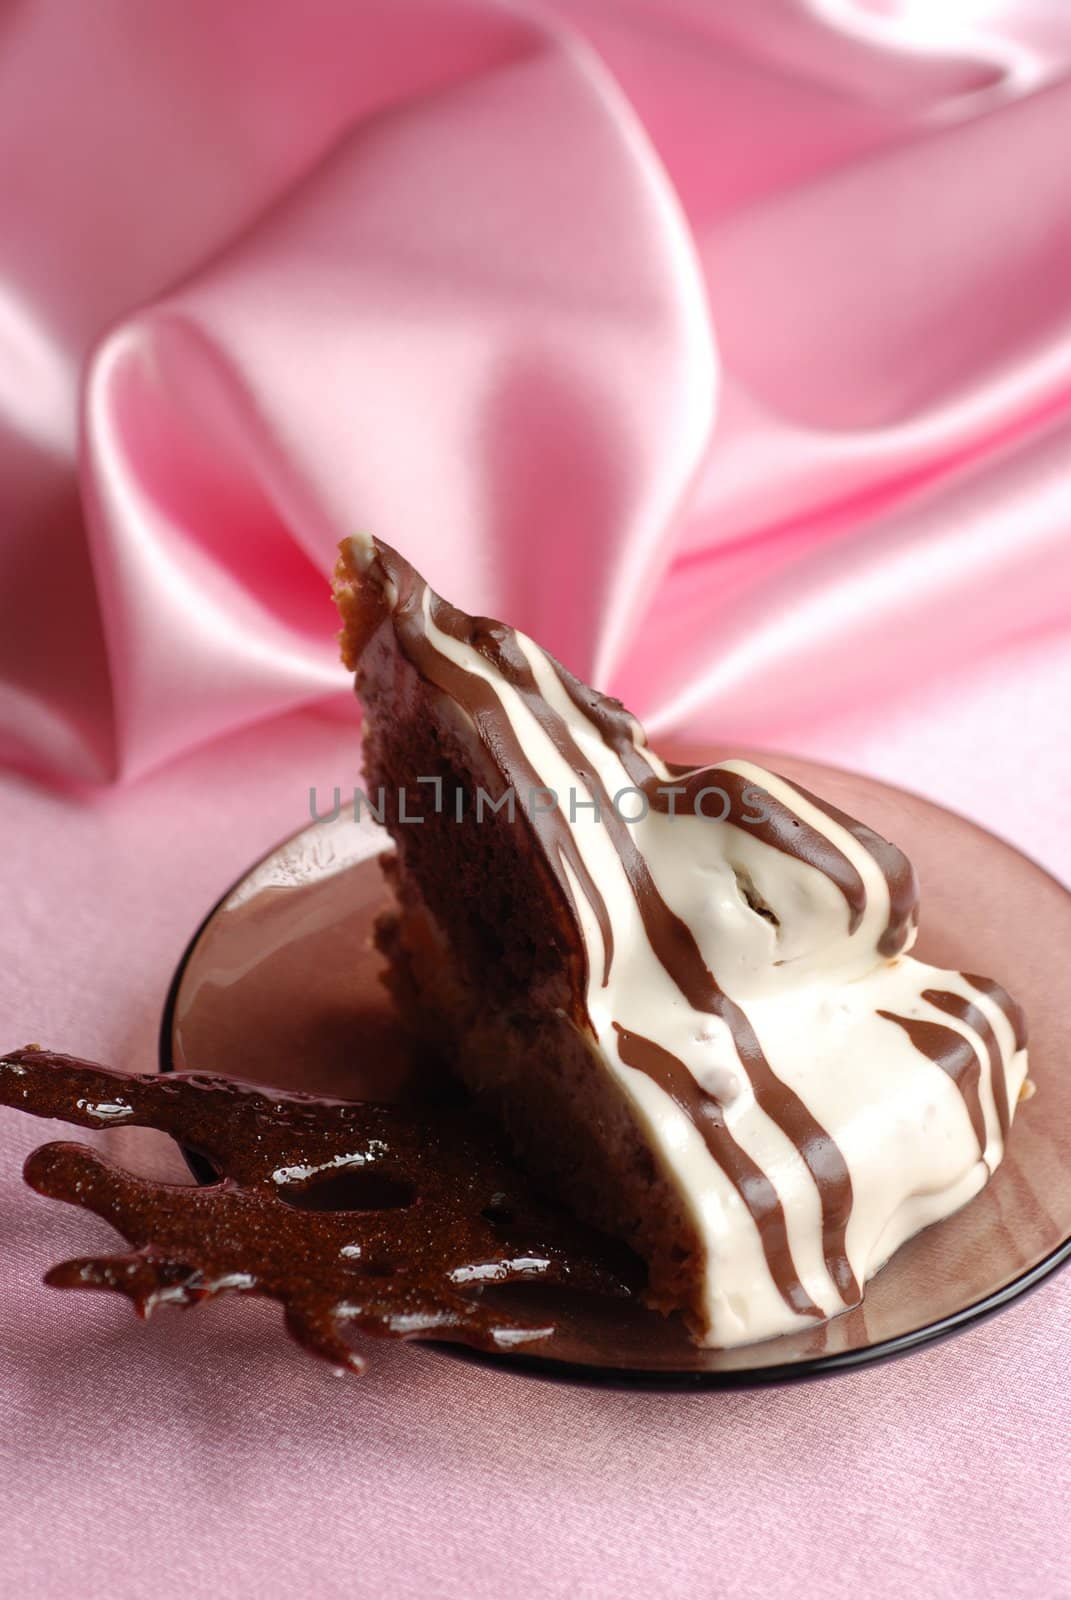 Reace of chocolate cake on a pink background